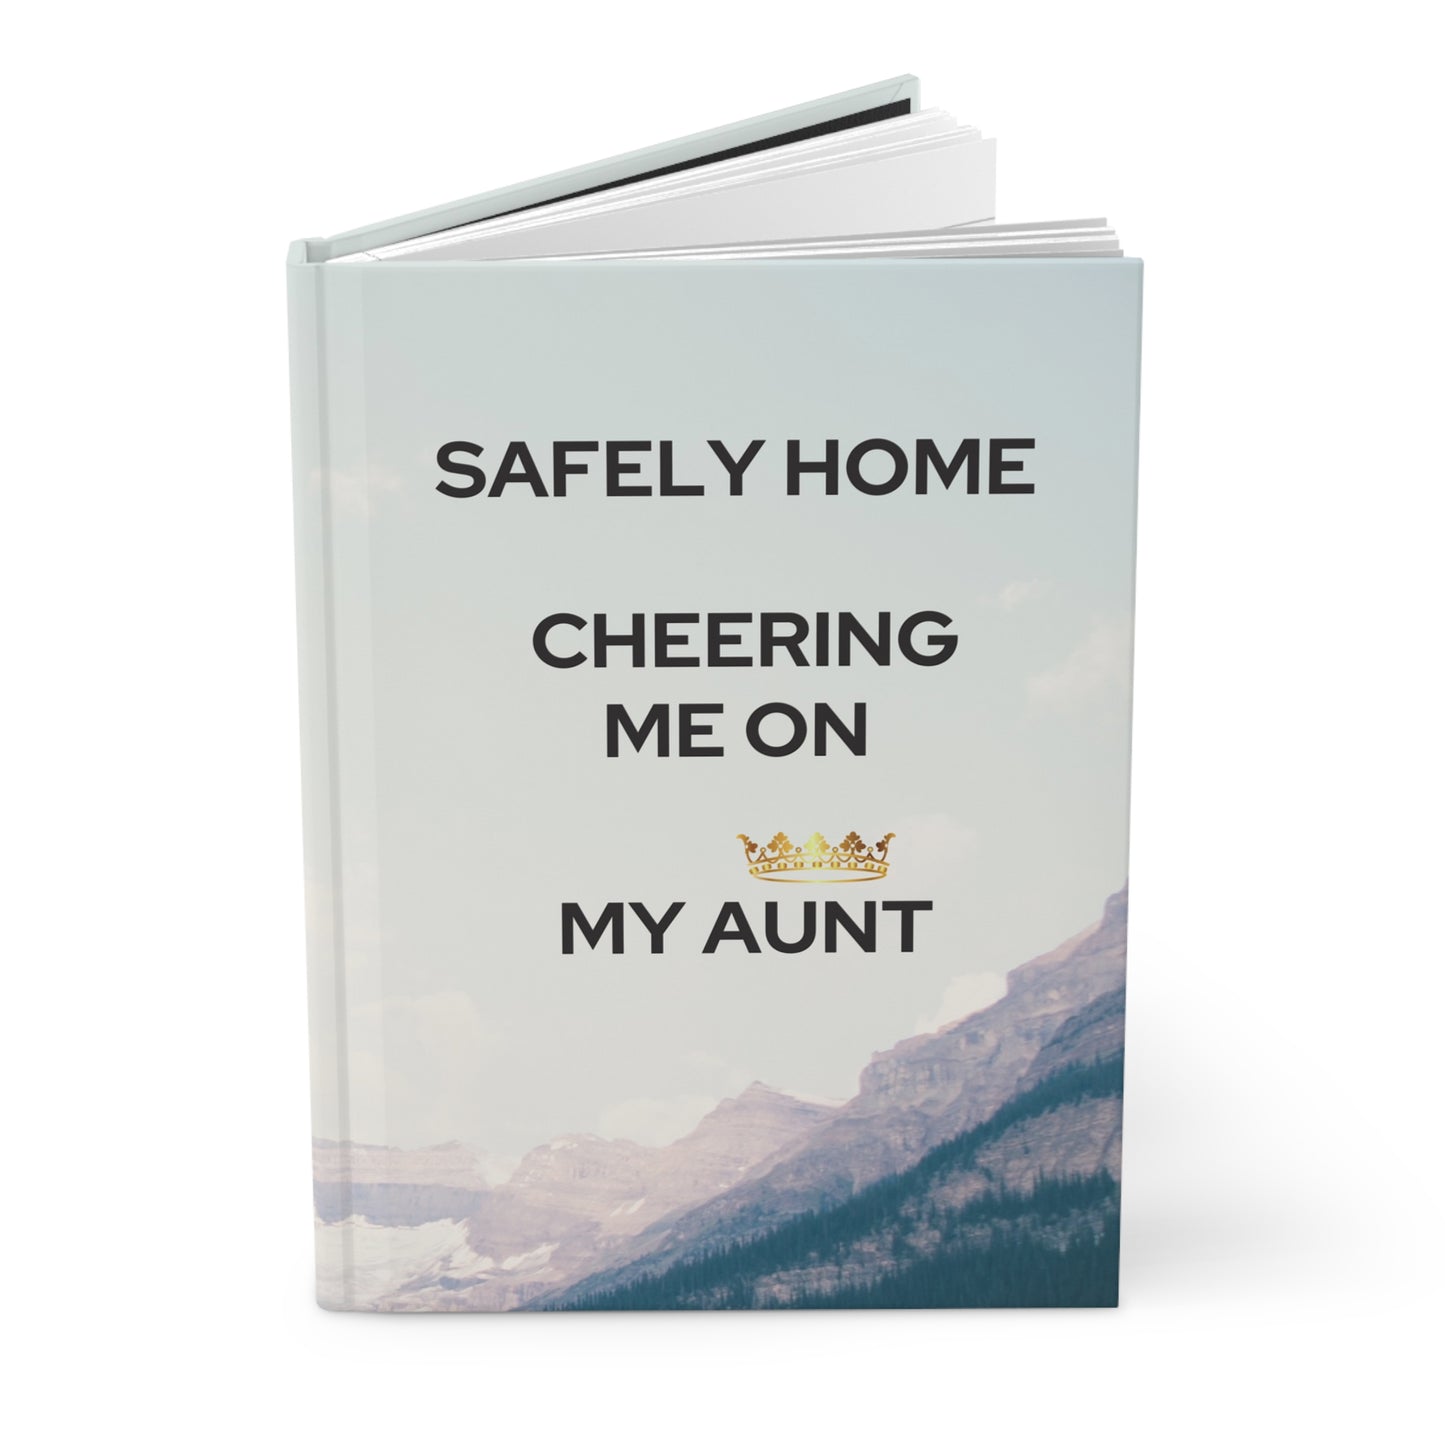 Grief Journal for Loss of Aunt, Safely Home Cheering Me On